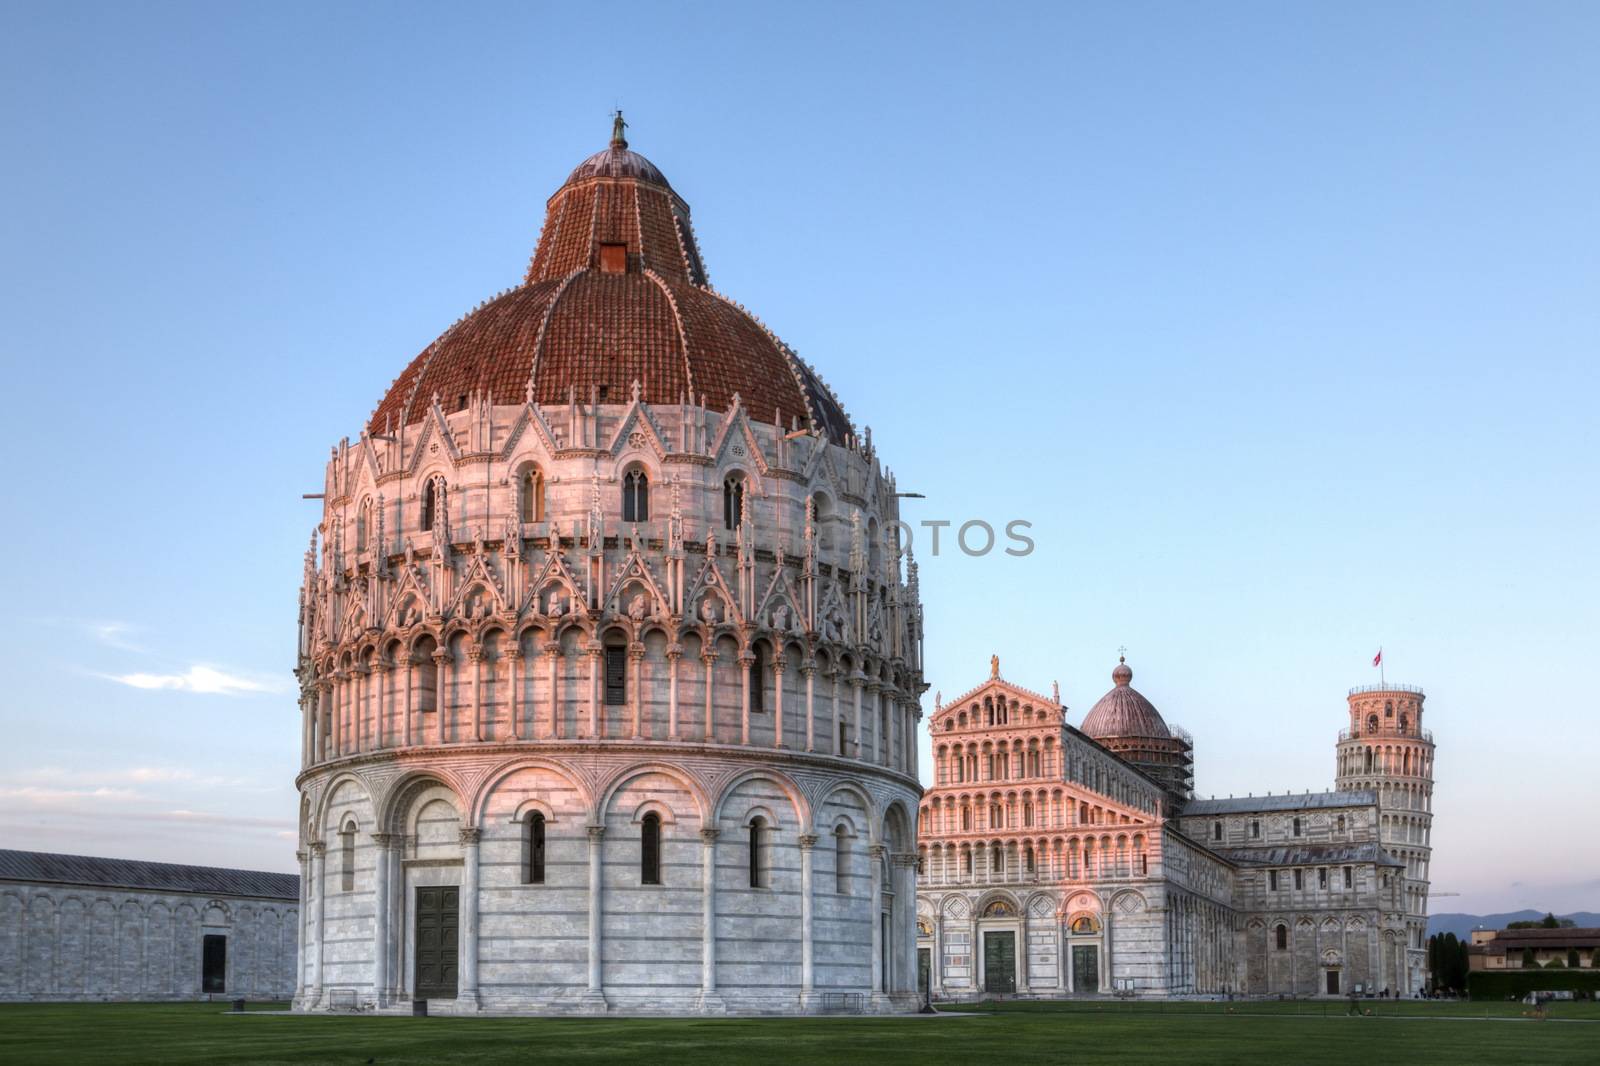 Piazza dei miracoli with the Basilica and the leaning tower by sunset, Pisa, Italy, HDR